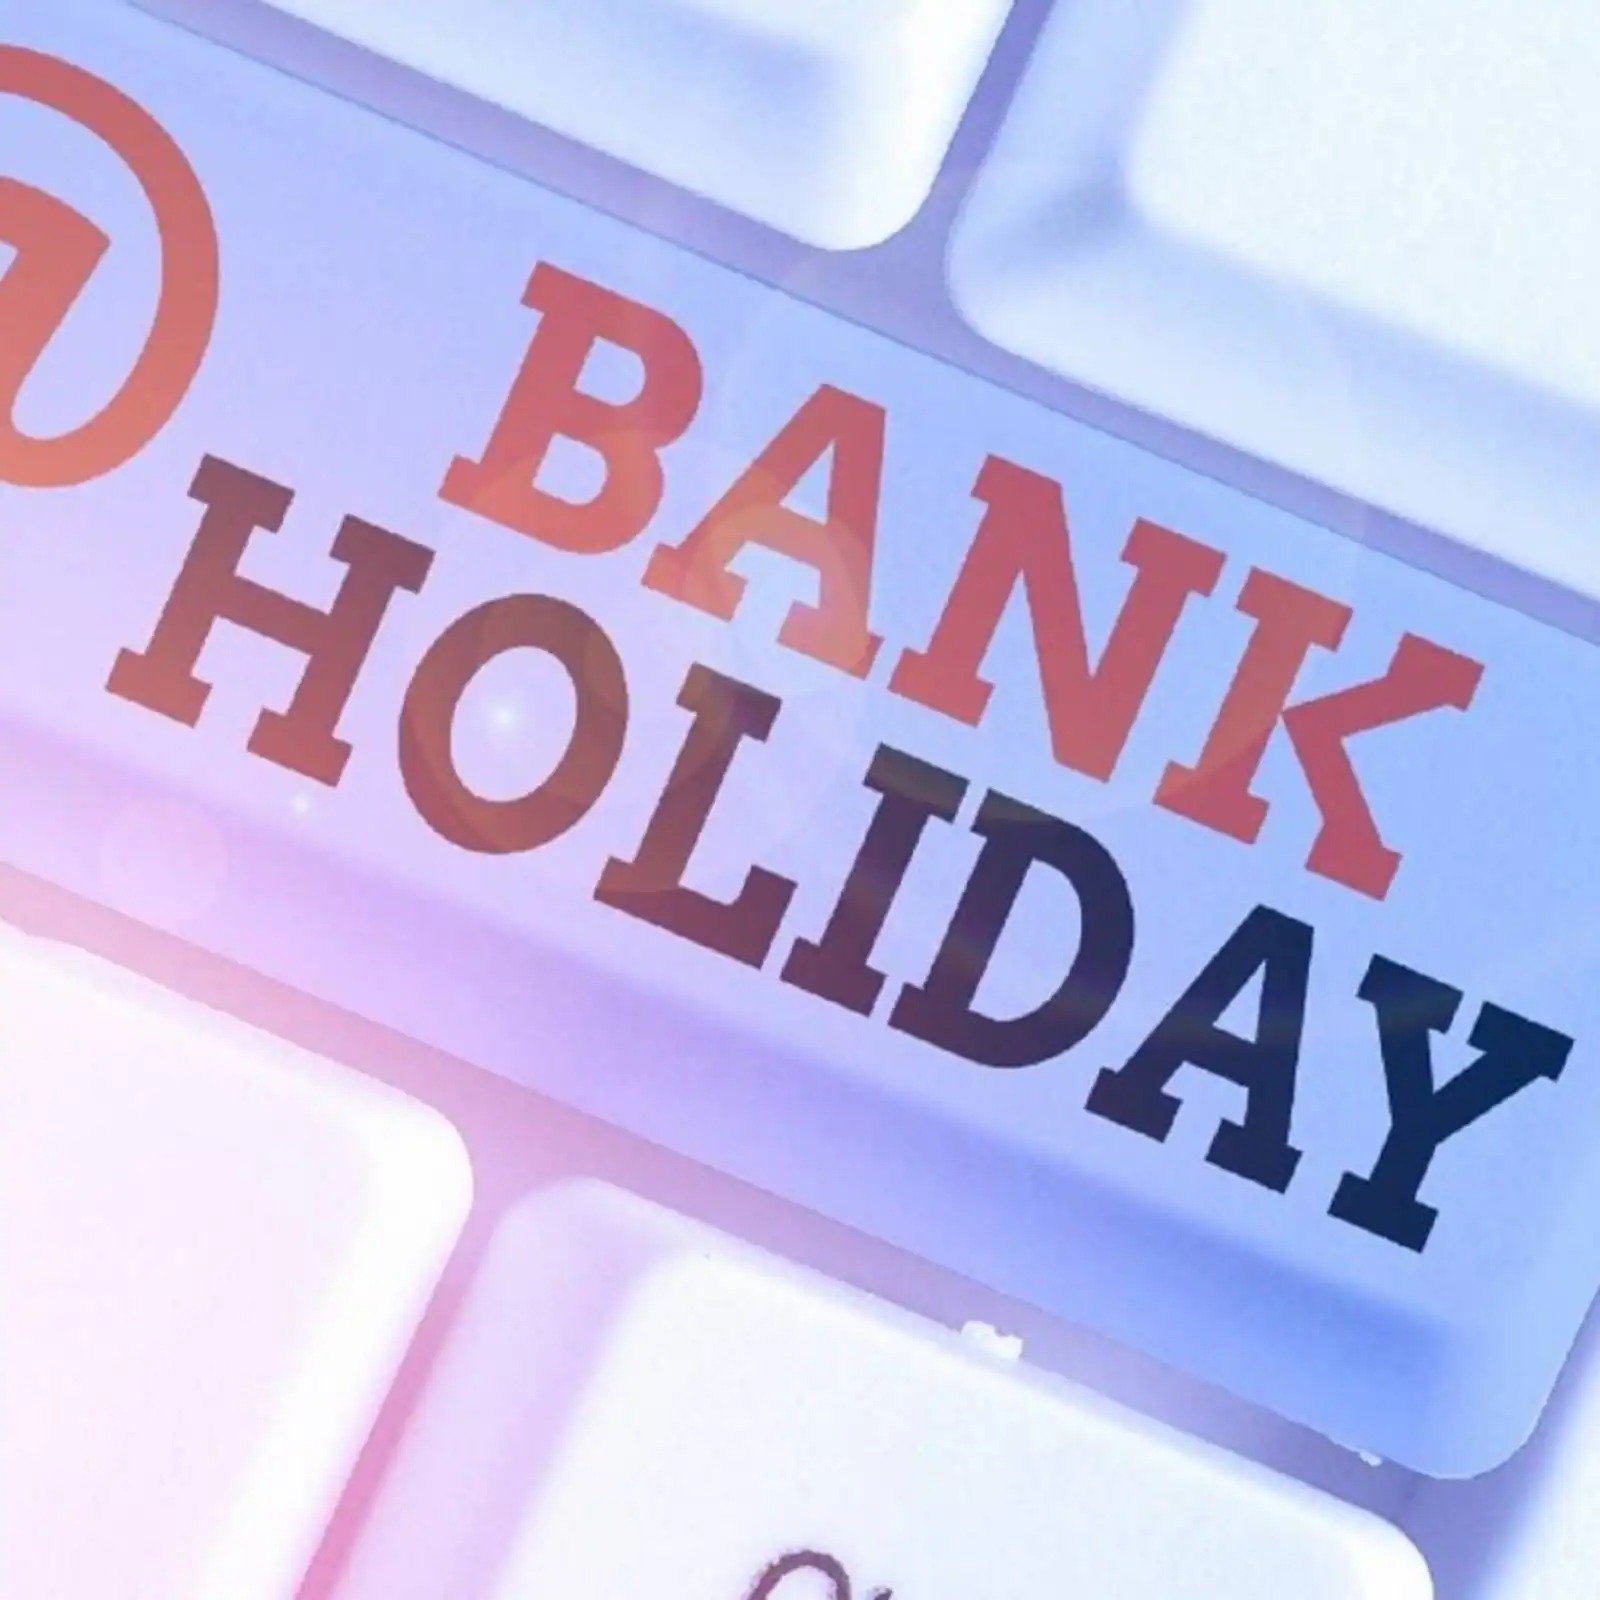 Bank Holiday - Banks are going to be closed for 11 days in the month, keep these dates in mind